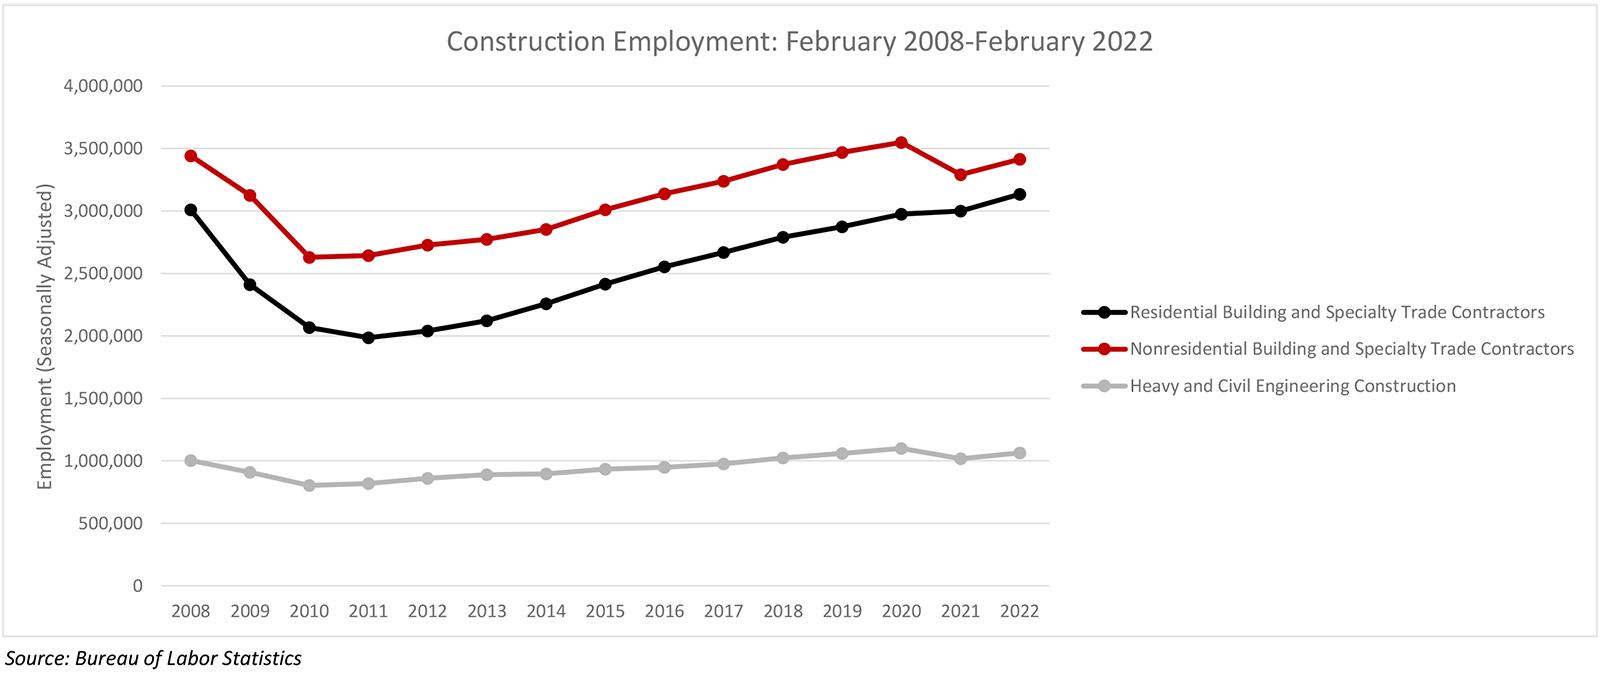 Construction Employment Surges in February